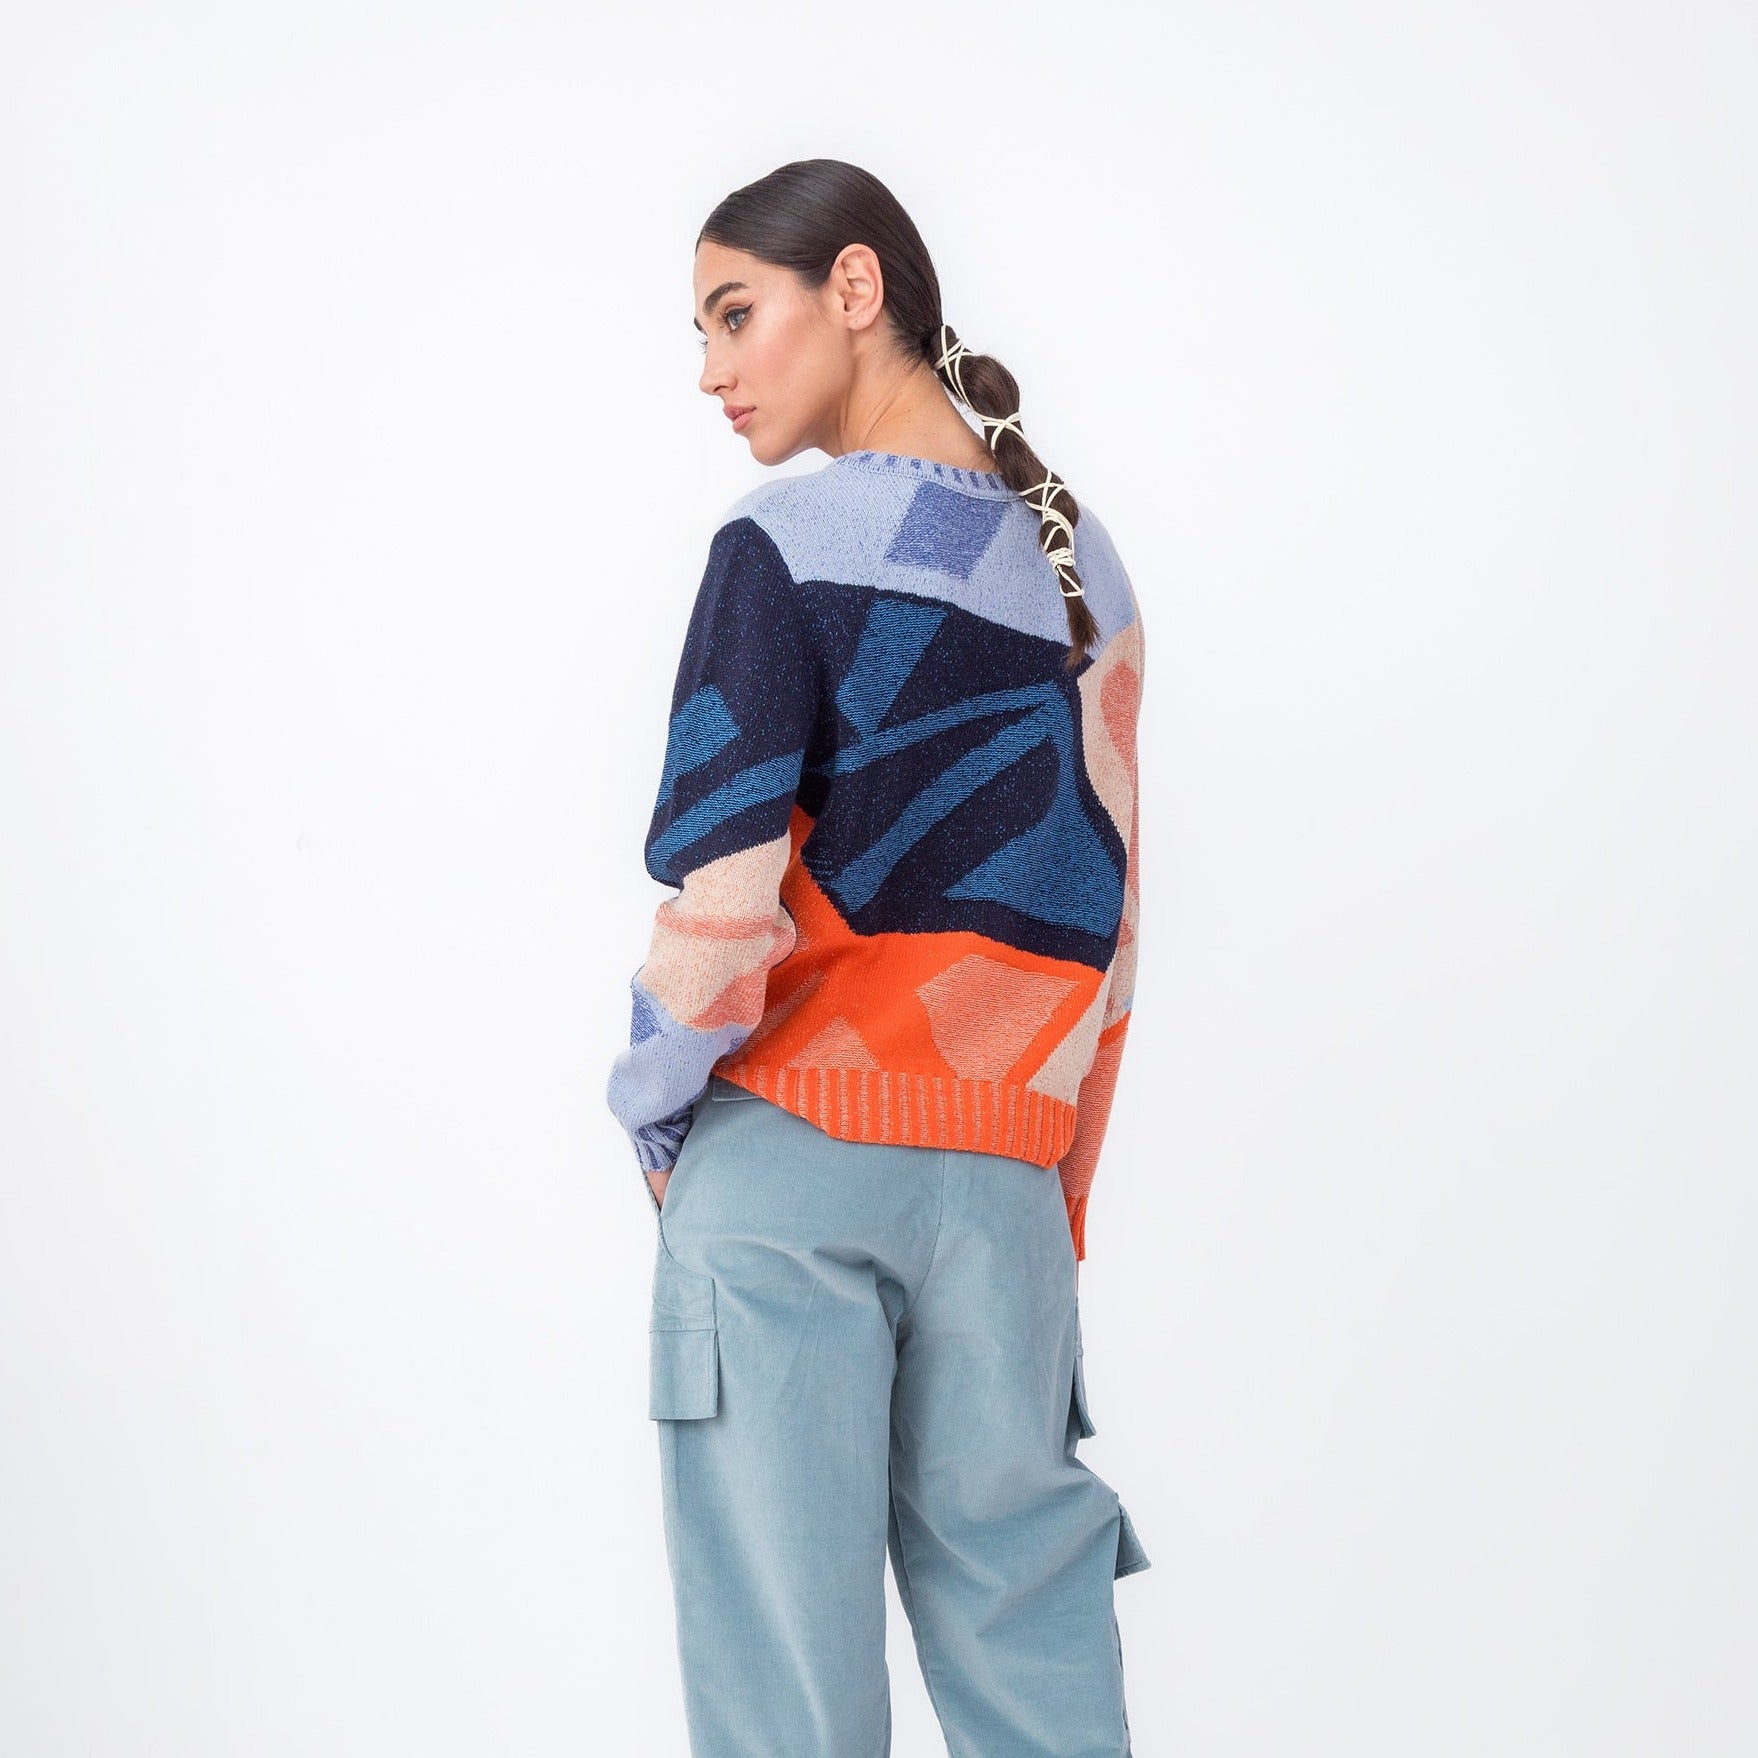 Jumper in blues and orange from IVKO.